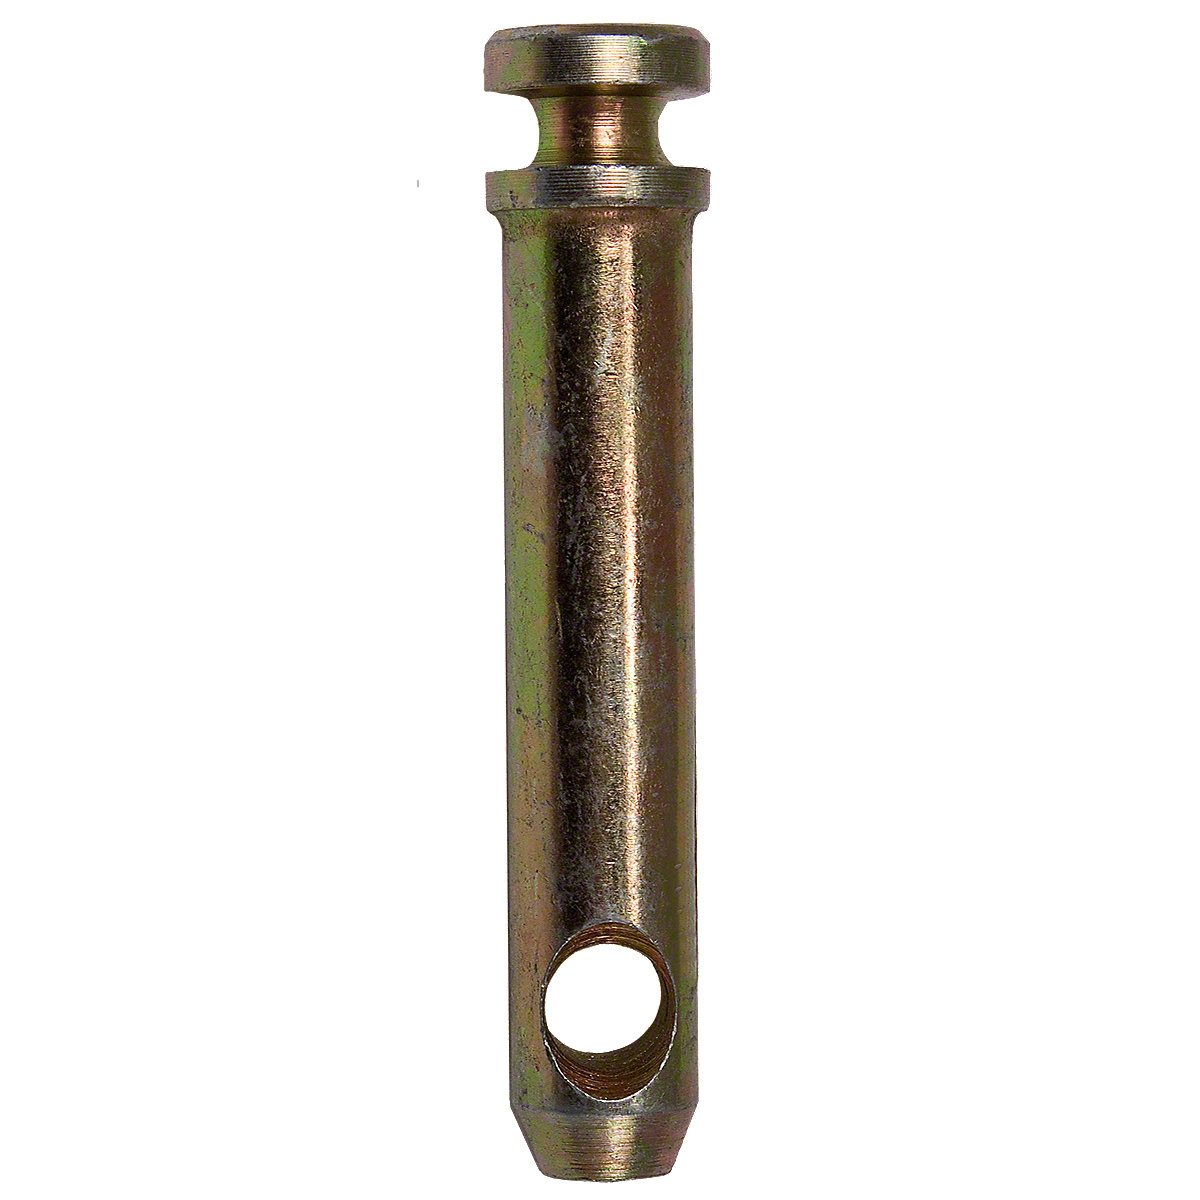 3 Point Top Link Pin For Massey Ferguson And Massey Harris Tractors.